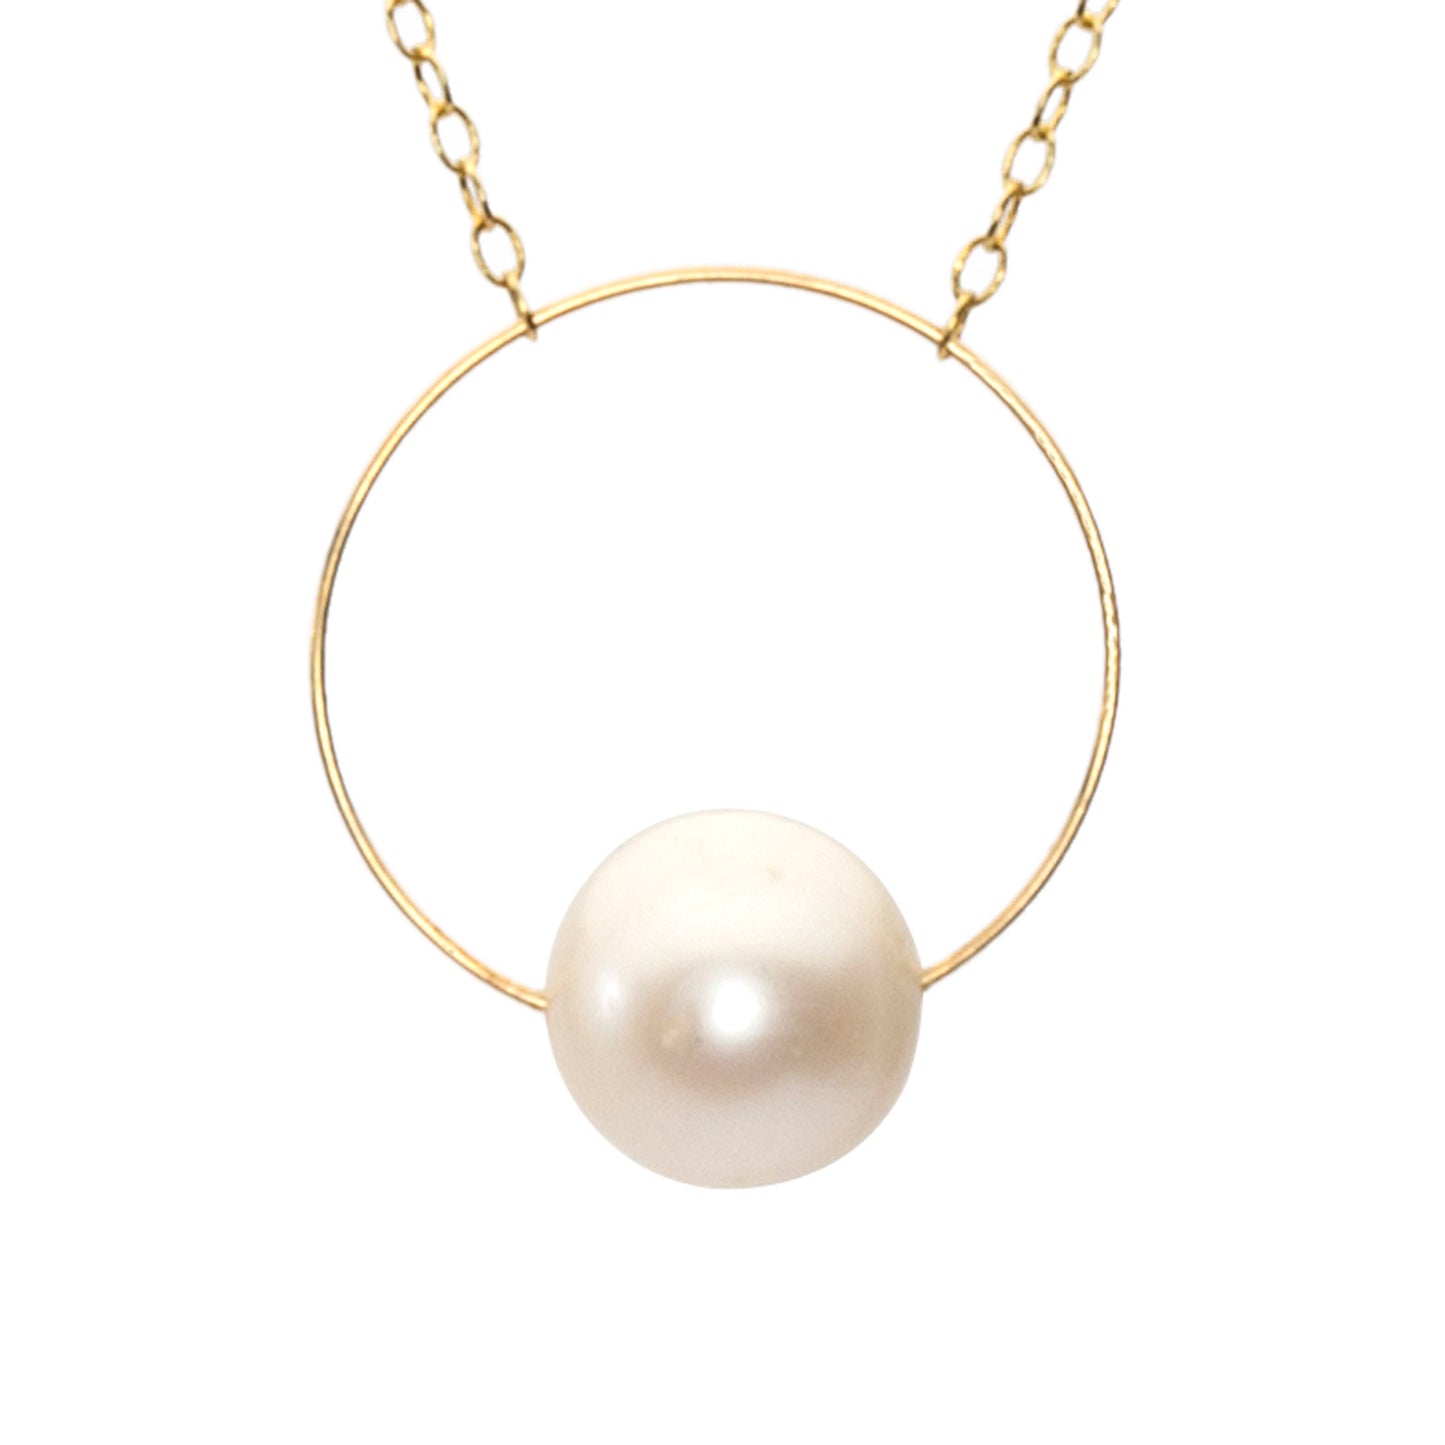 Medium Circle Pendant Necklace with Round Freshwater Pearl